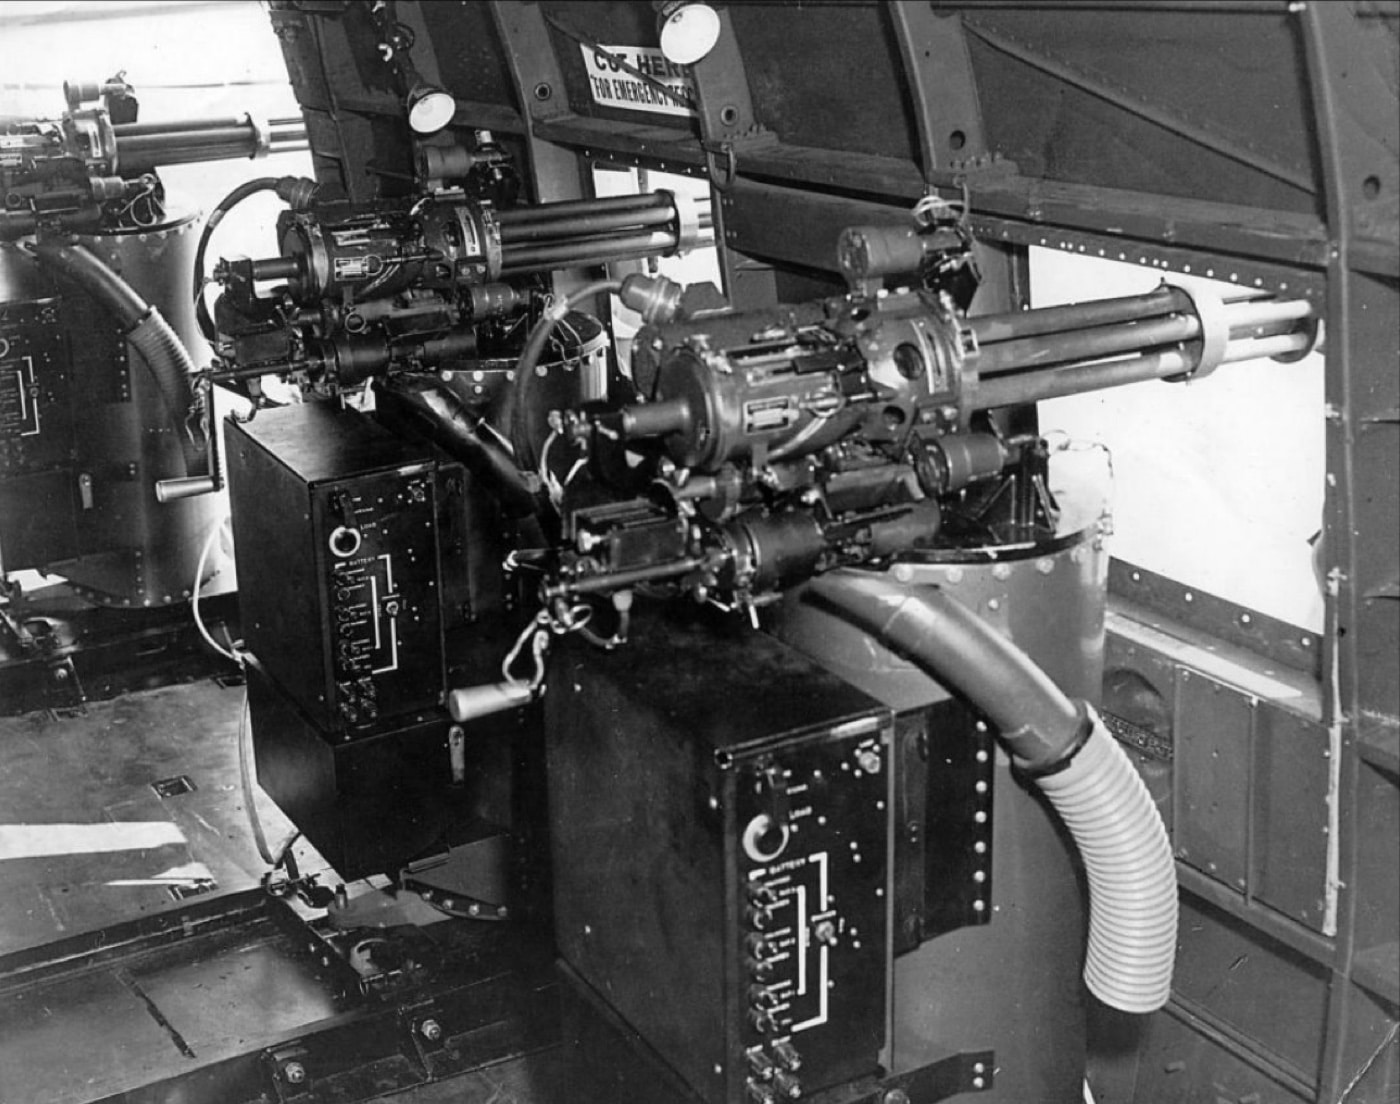 This image shows three M134 Miniguns on standardized mounts with control panels. As the Air Force establish an AC-47 squadron, it needed to standardize the equipment and methods of operation in the gunship role. Air Force Systems Command played a large role in the operational history of the 14th Air Commando Wing and was a large part of why gunship trials were so successful. 